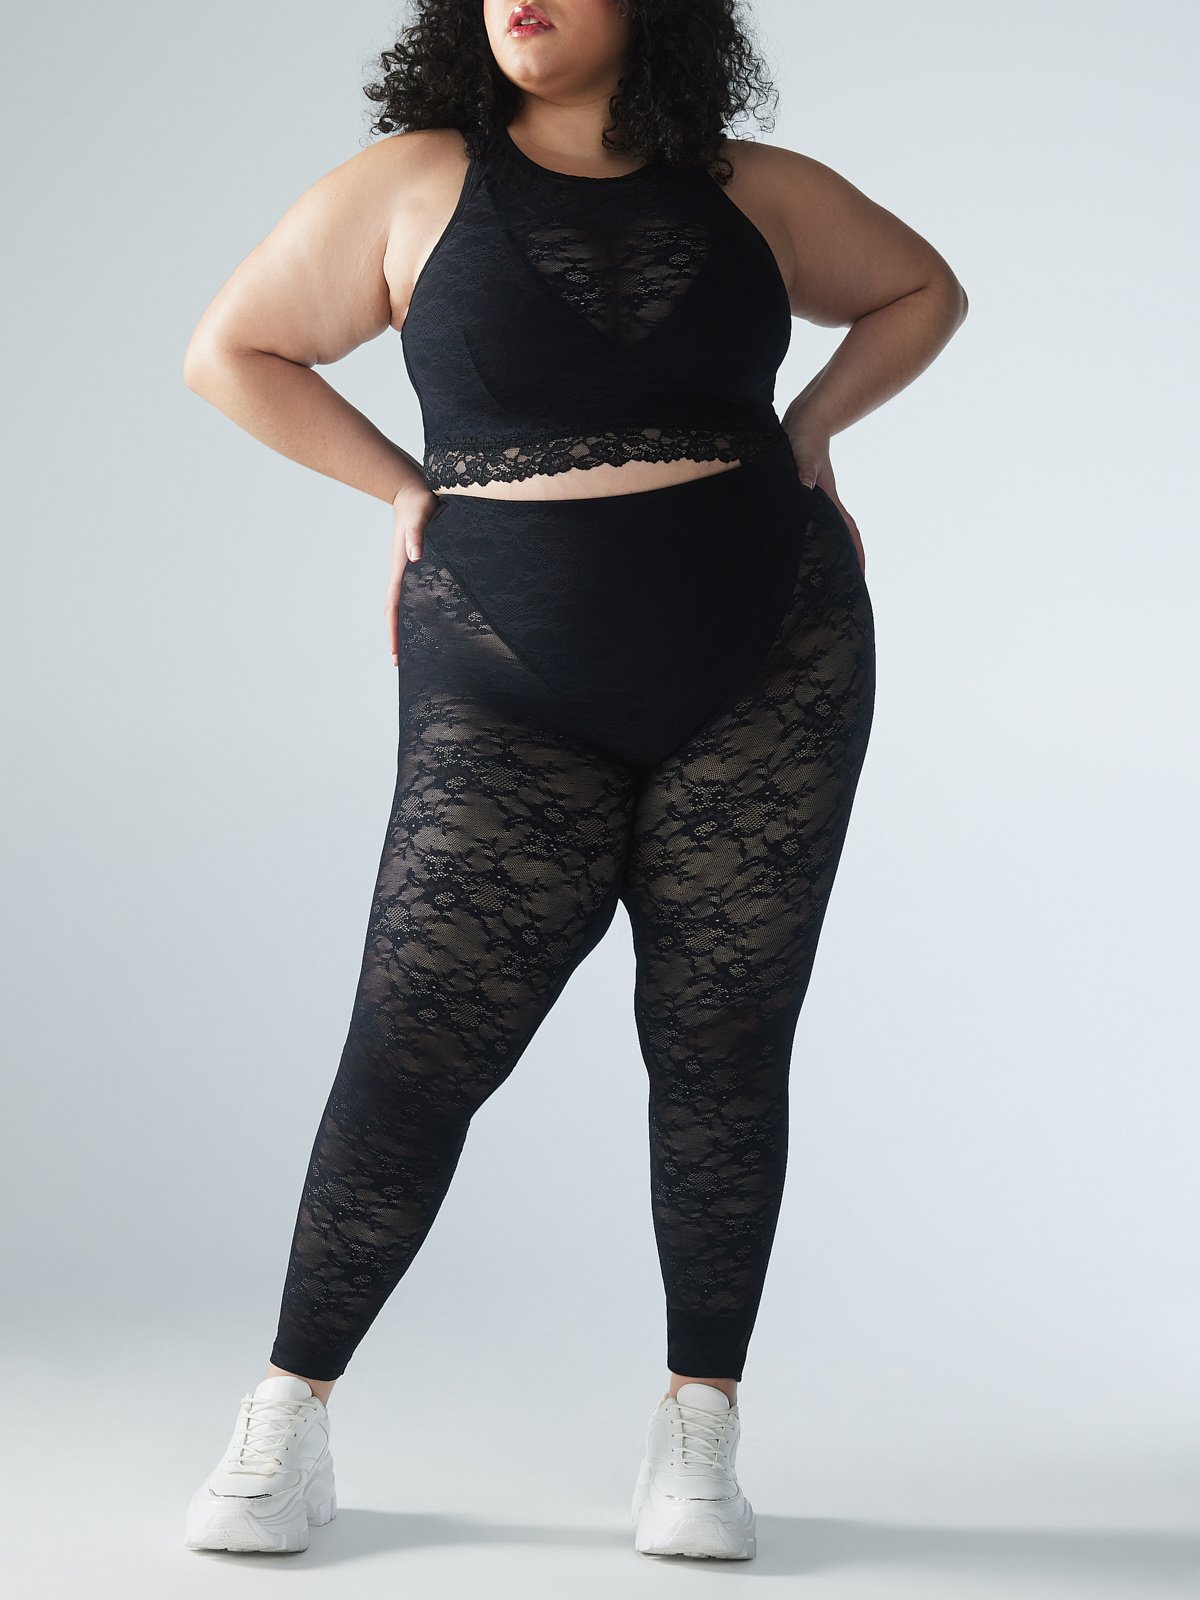 Black Lace Two Piece Set For Women Perfect For Parties, Clubs, And  Festivals Includes See Through Crop Top And Lace Leggings Matching Set  X0709 From Musuo03, $16.4 | DHgate.Com